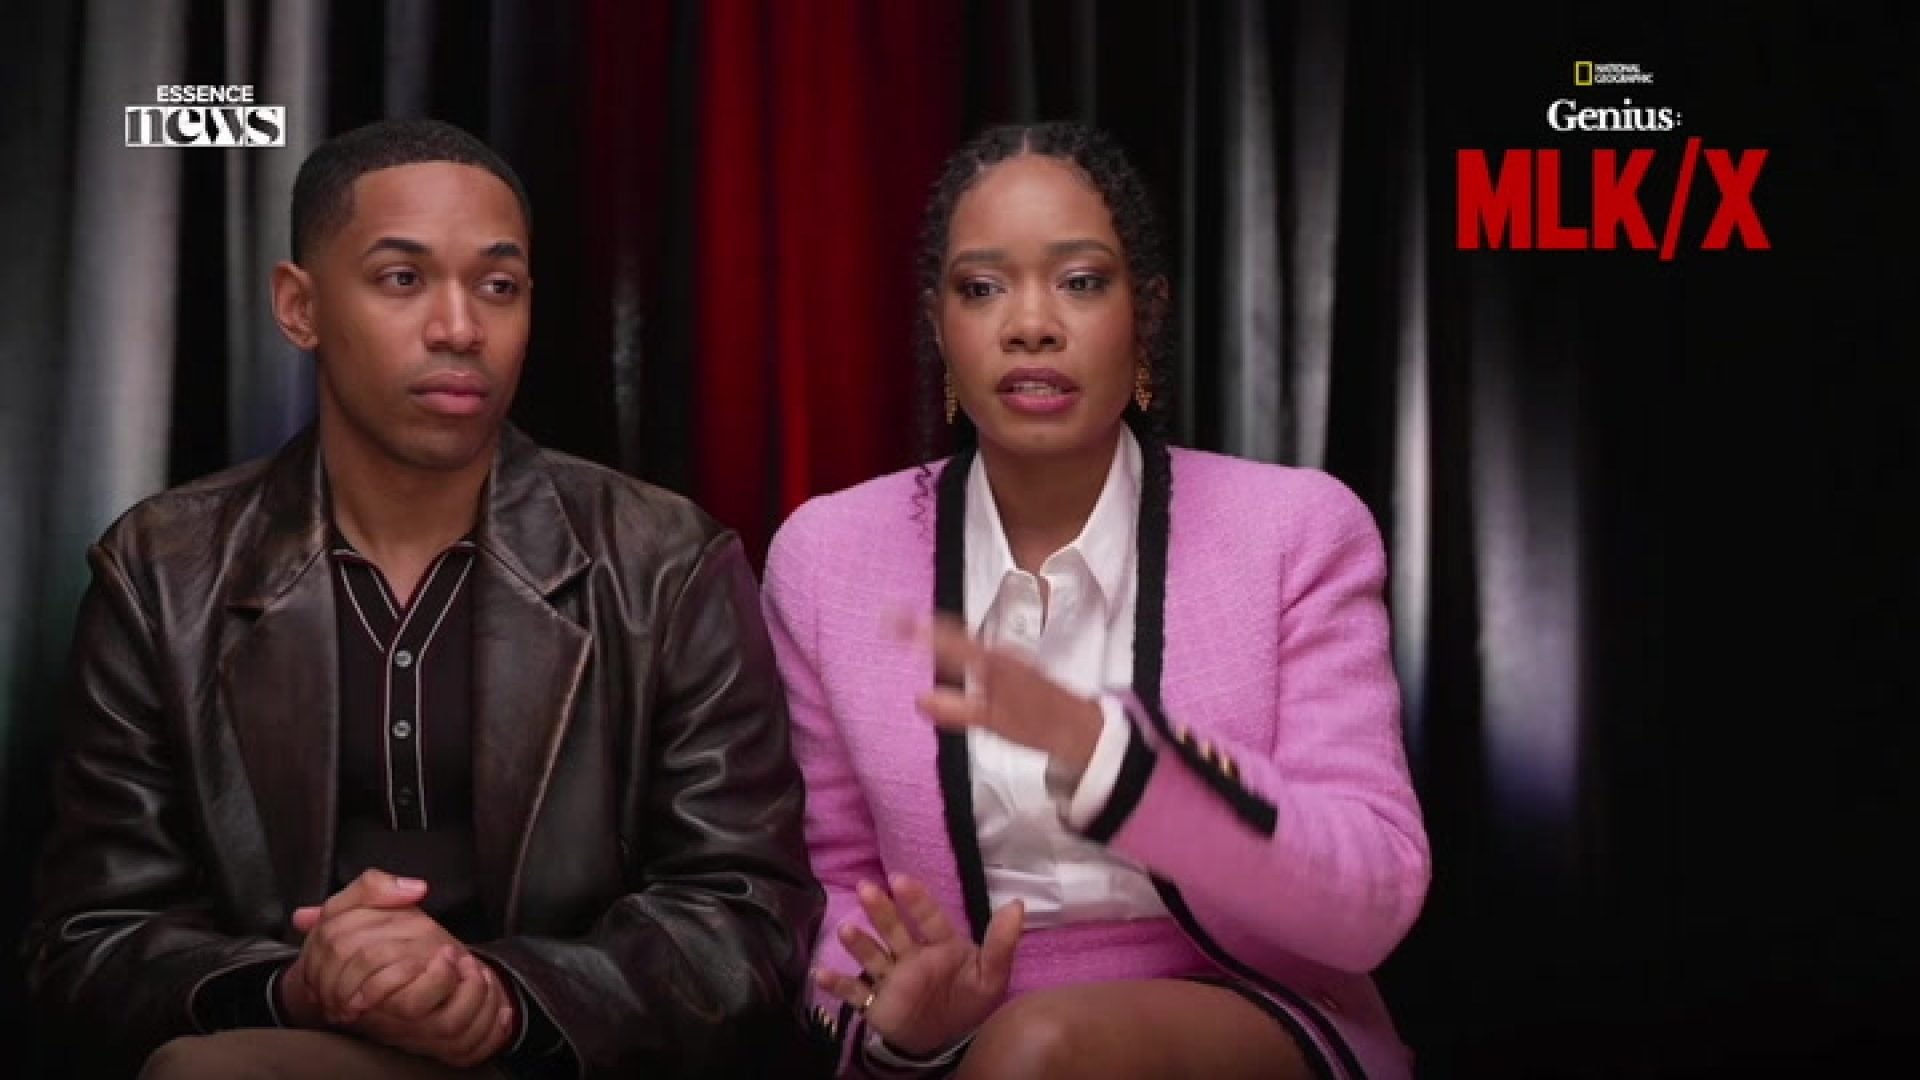 WATCH: Kelvin Harrison, Jr. and Weruche Opia Talk Breathing New Life Into The Legacies of Martin And Corretta For ‘Genius: MLK/X’